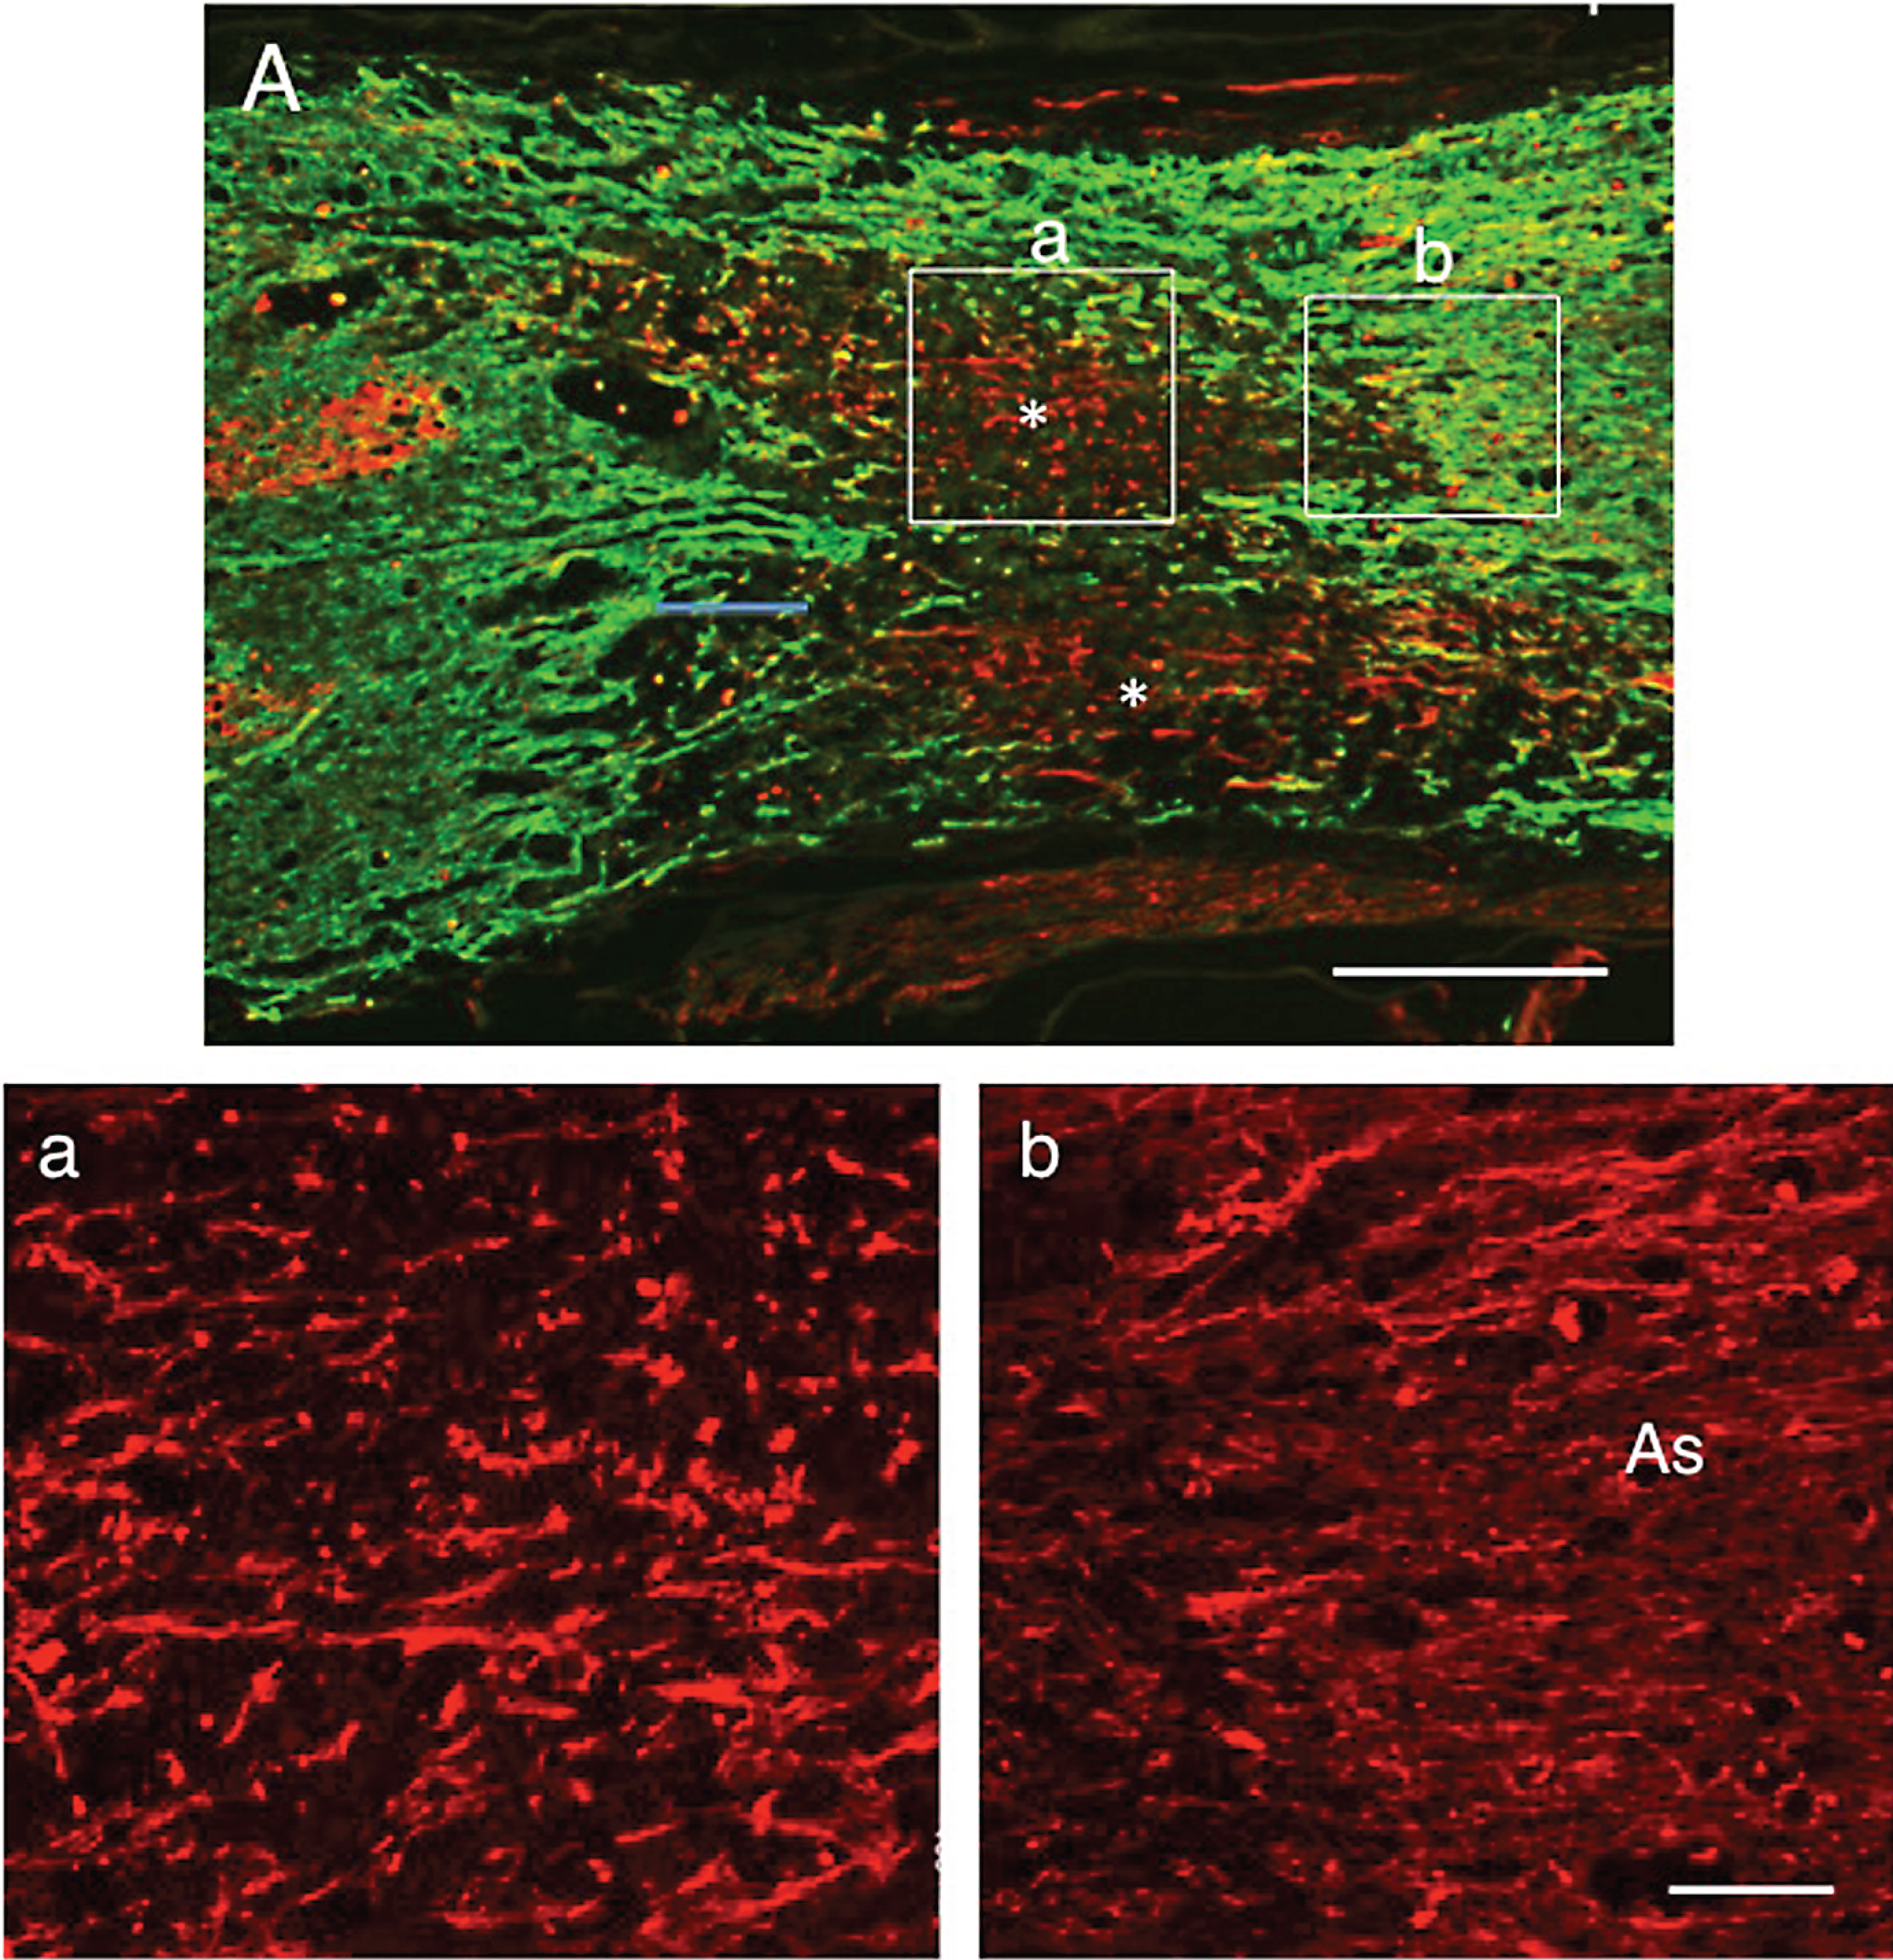 Double staining for axons (red) and astrocytes (green). 5 w-TP. A: There are astrocyte-devoid areas (*) at the lesion. There is no astrocyte scar at the border of the lesion. a: The part enclosed with rectangle a in panel A was enlarged (staining for axons). There are numerous axons with various diameters and irregular orientations in this astrocyte-devoid area. b: The part surrounded with rectangle b in panel A is enlarged (staining for axons). The region (As) corresponds to the astrocyte region (green) in rectangle b. Axons spared in the white matter at the border of the lesion are fine and longitudinally oriented. Scale: 500 μm for A, and 100 μm for a and b.